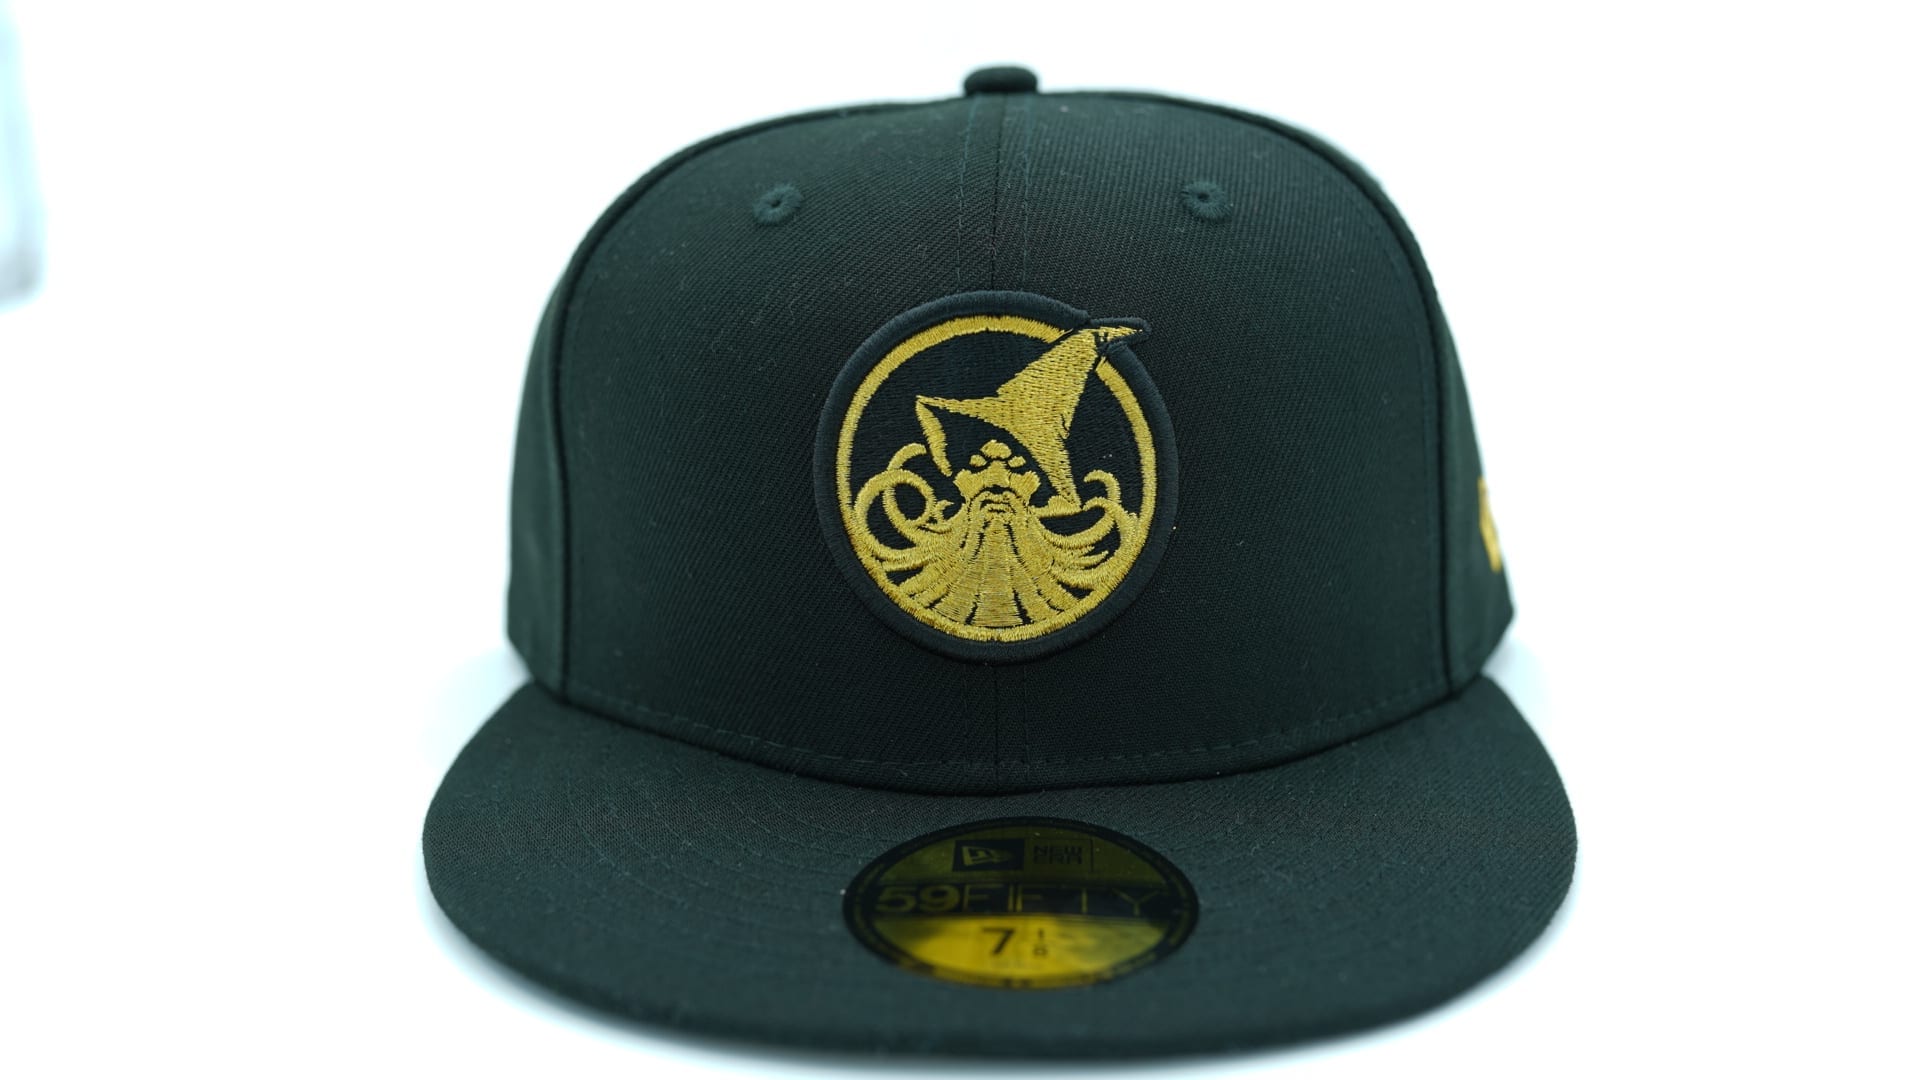 This fitted is on a Black base with a White Hello Kitty accented by her 